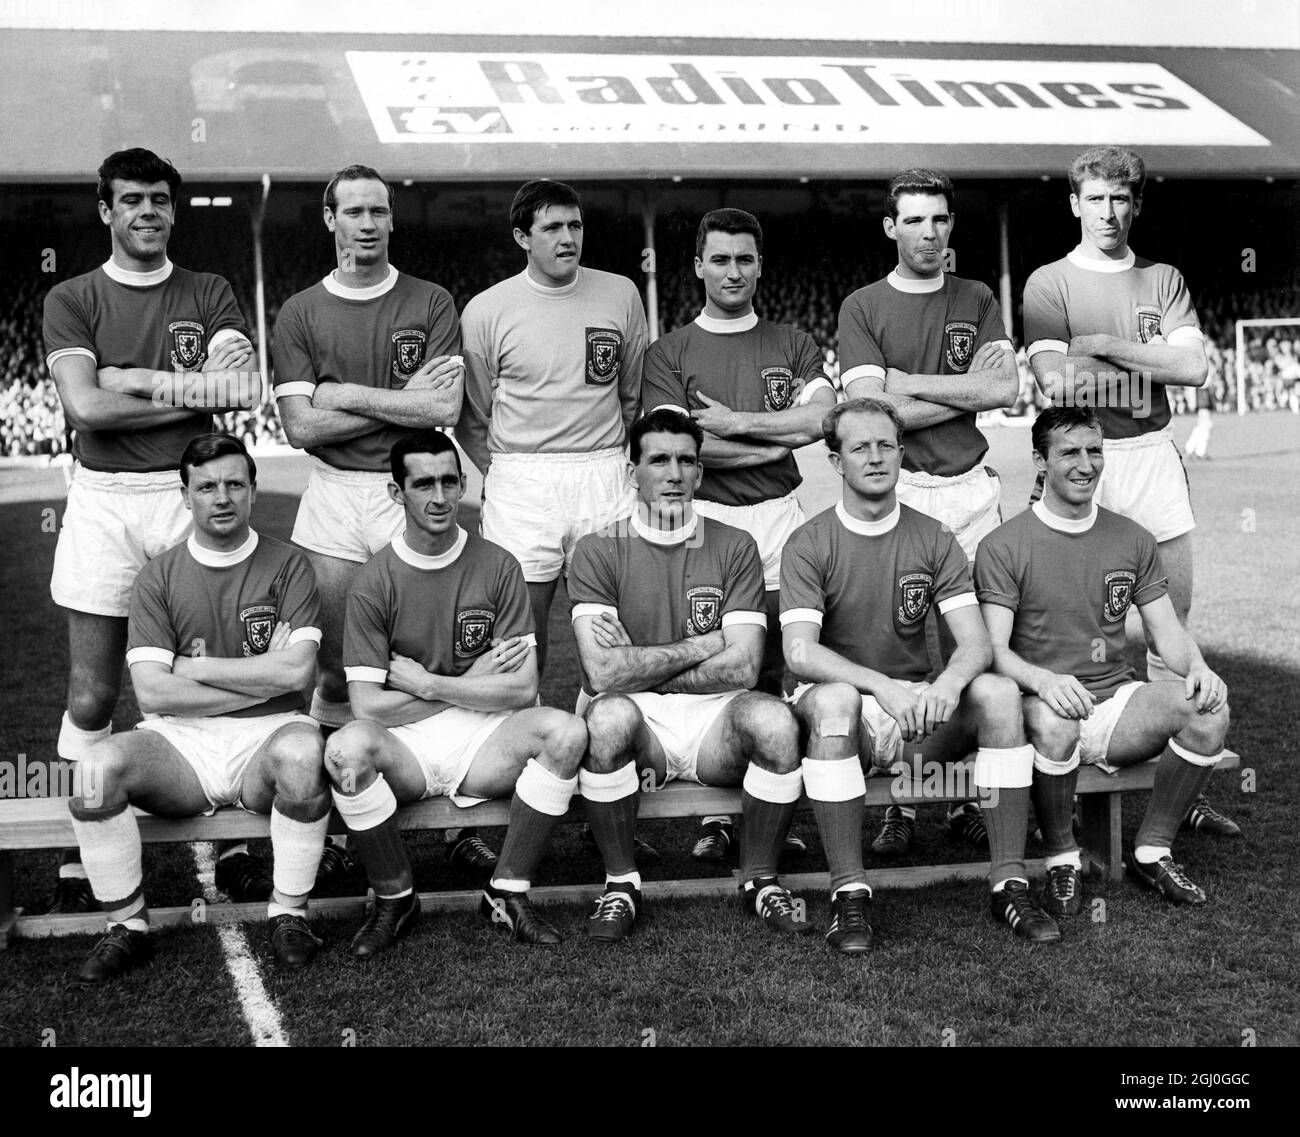 The Welsh Team at Ninian Park Cardiff Photo shows: (back row l-r) M. England; T. Hennessey; D. Hollins; G. Williams; A. Burton; G. Davies (front row l-r) L. Allchurch; R. Vernon; S. Williams (captain), J. Allchurch and C. Jones. 12th October 1963 Stock Photo